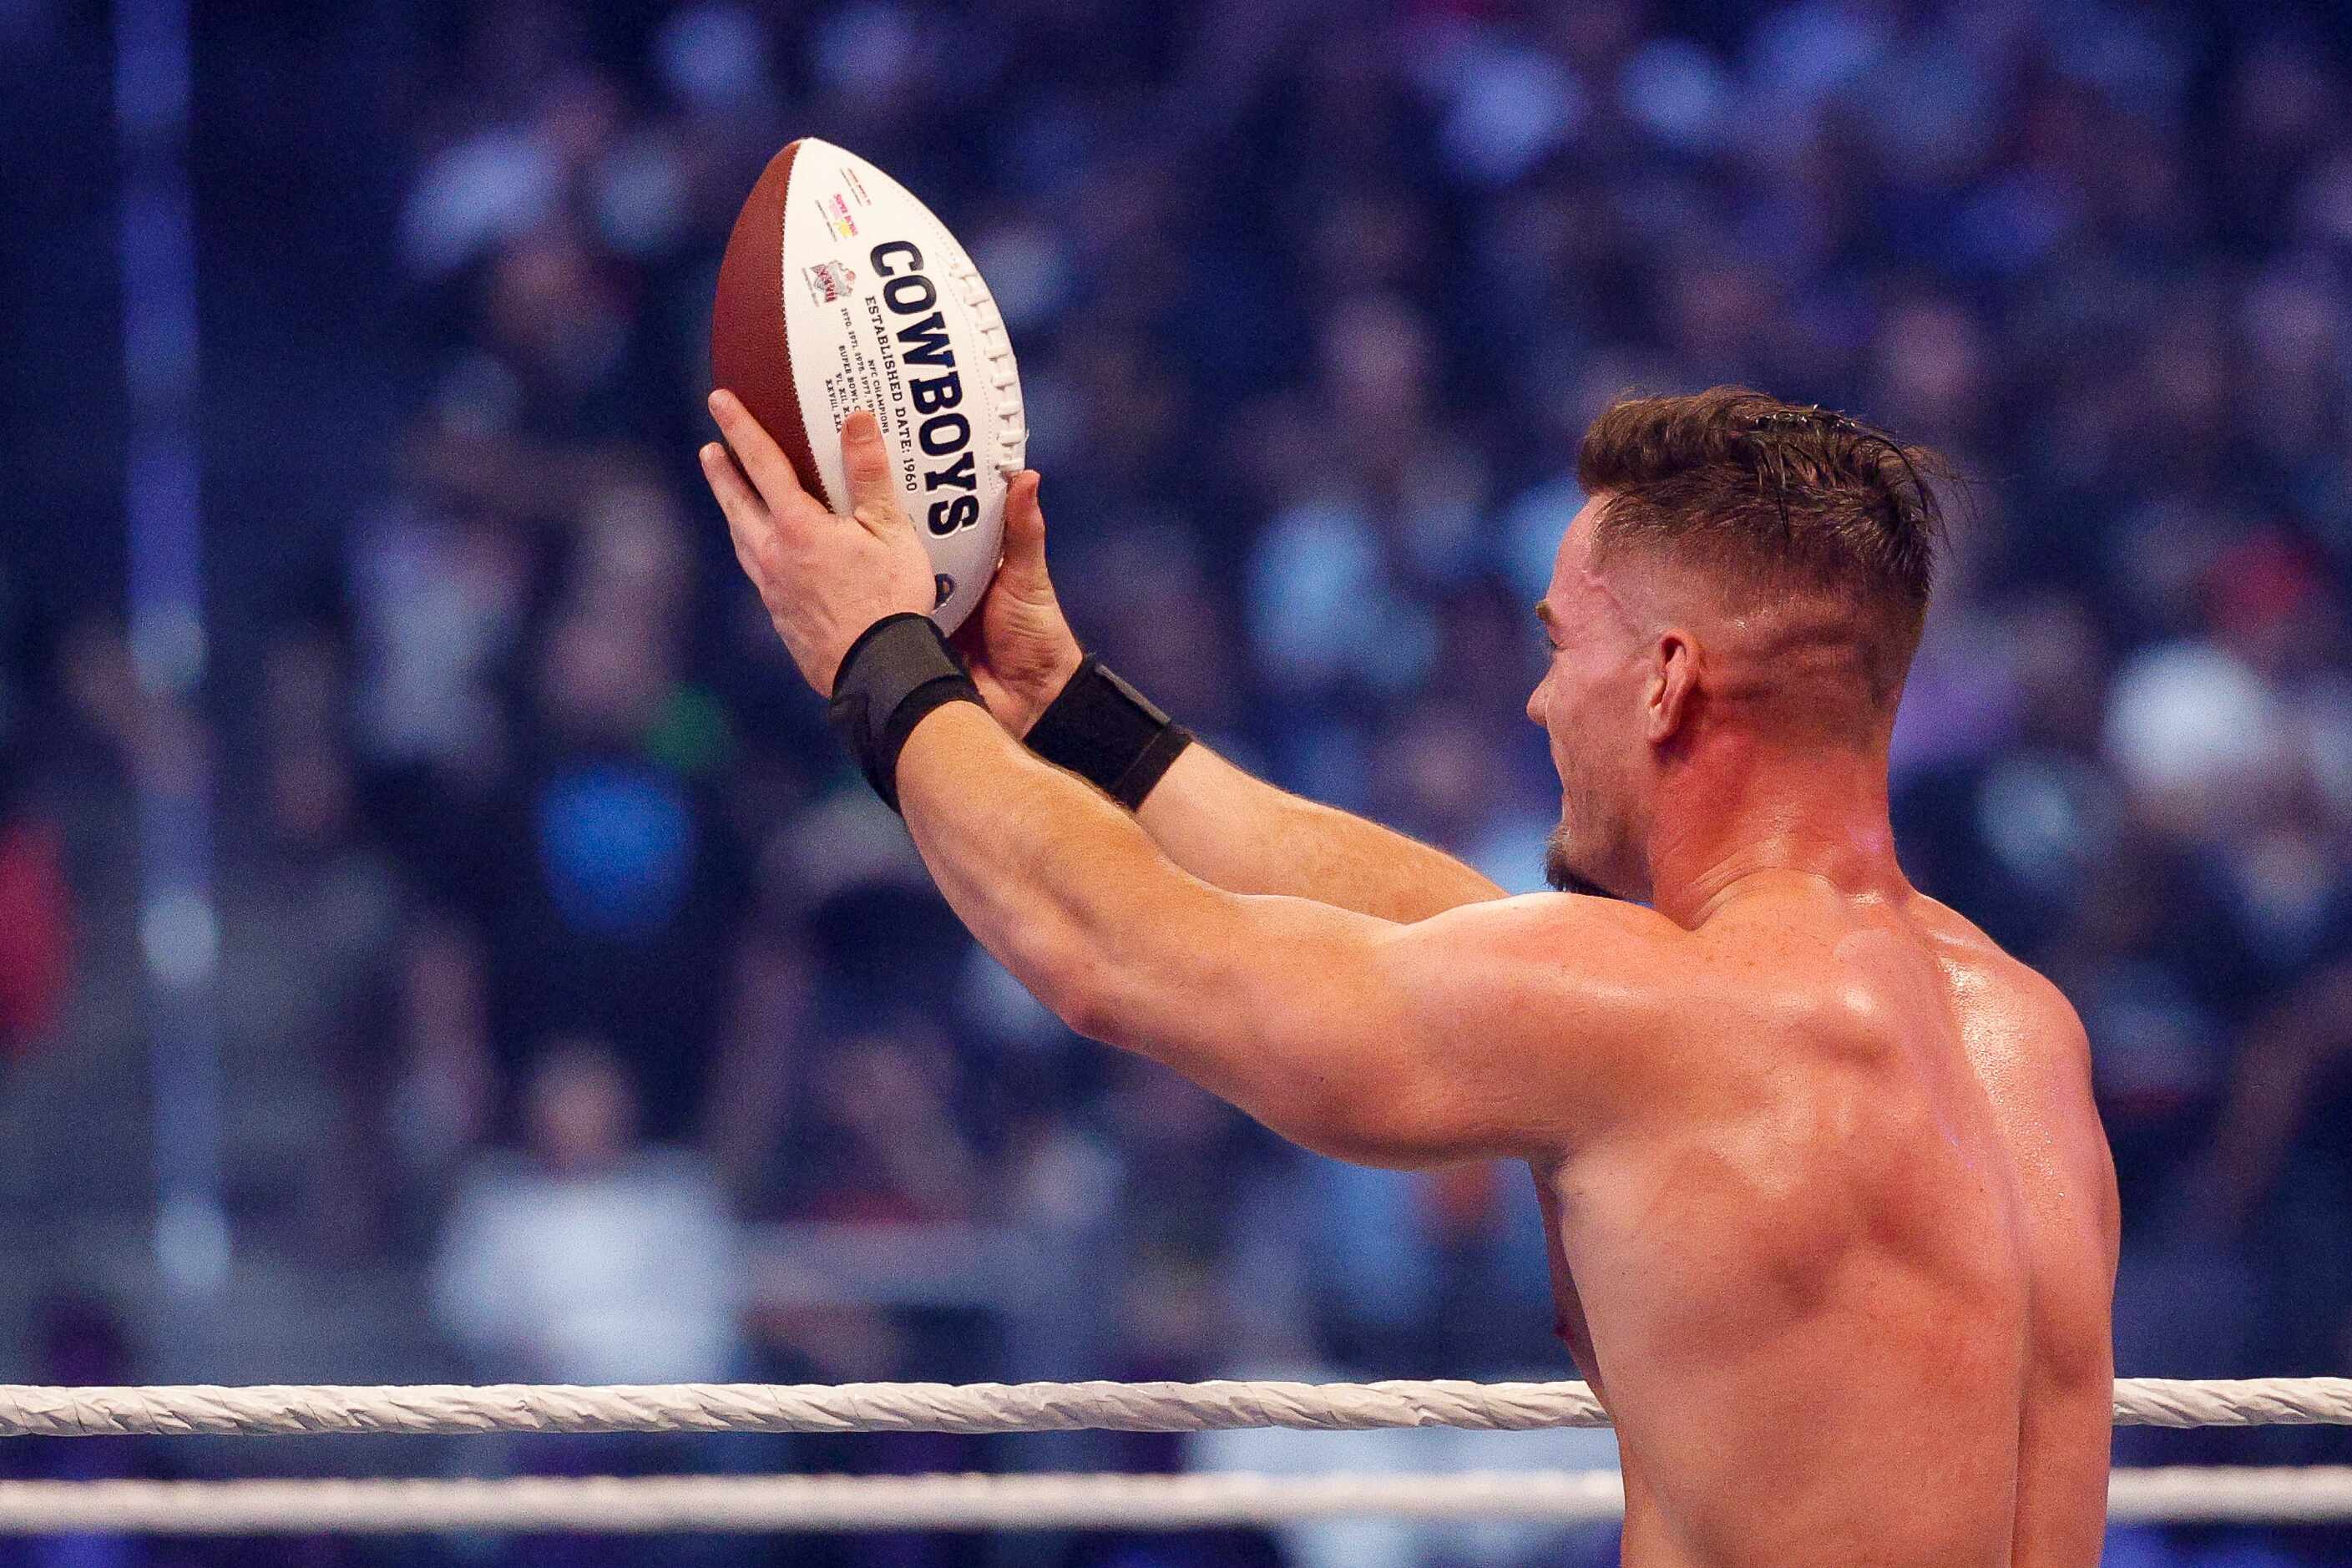 Austin Theory carries a Dallas Cowboys football during a match at WrestleMania Sunday at...